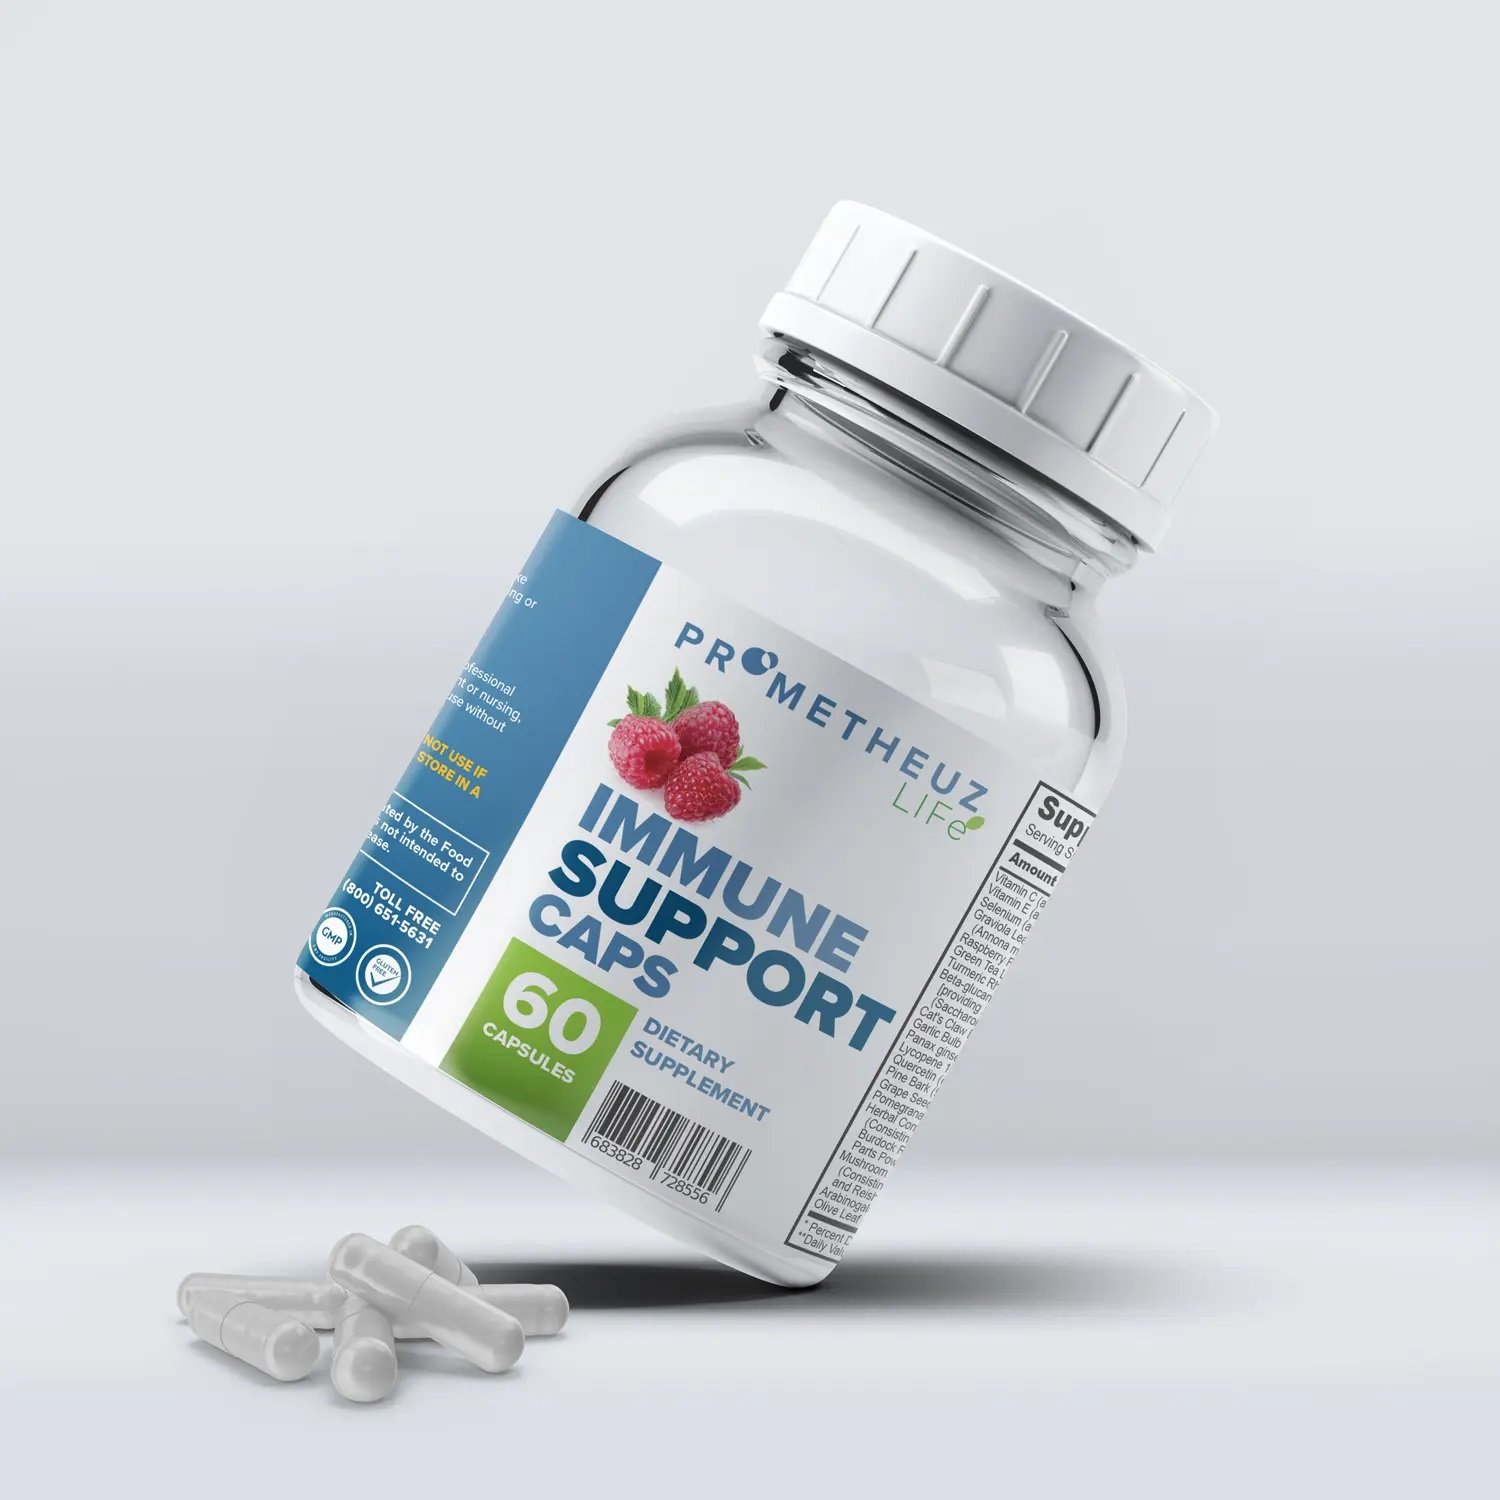 Immune Support Capsules For Sale in USA. At RCD.bio all our compounds are 3rd party tested to ensure quality and purity. Buy Now!